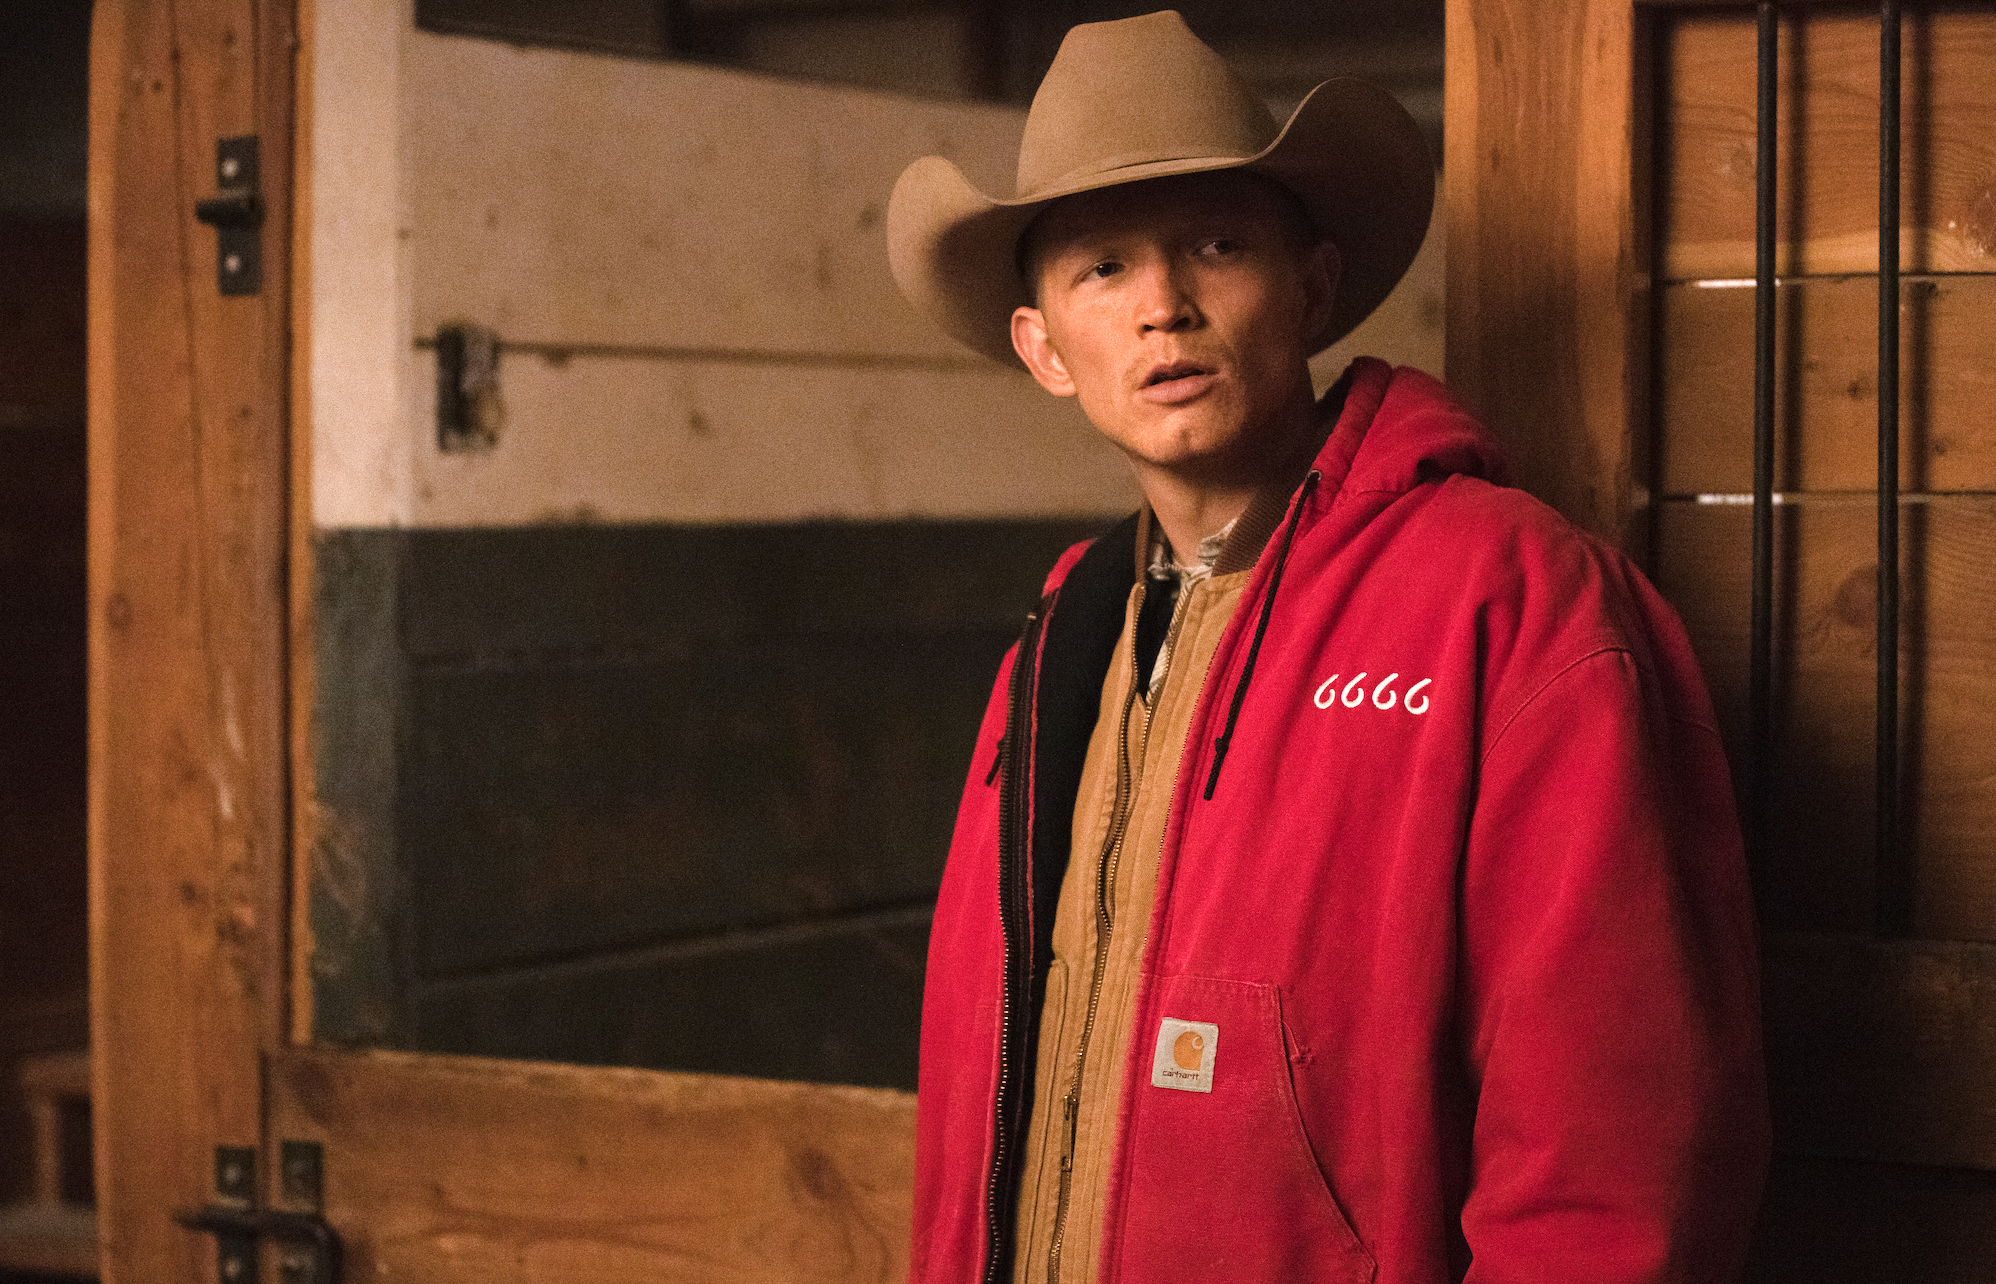 Roux Foto Marquee Yellowstone' Season 4 Finale Recap: What Happened on Episode 10?